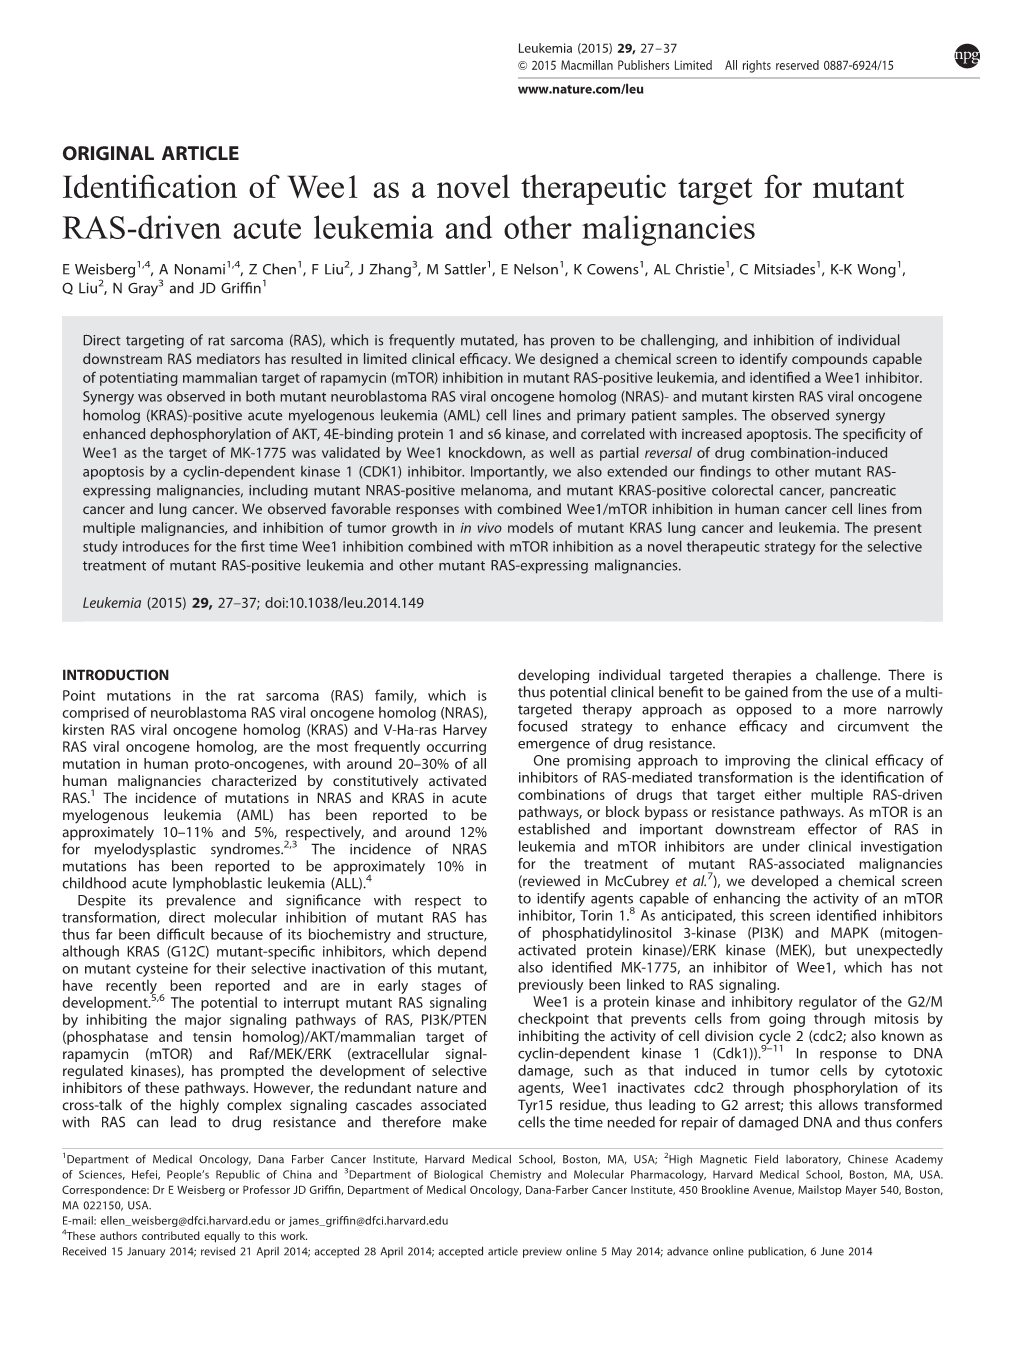 Identification of Wee1 As a Novel Therapeutic Target for Mutant RAS